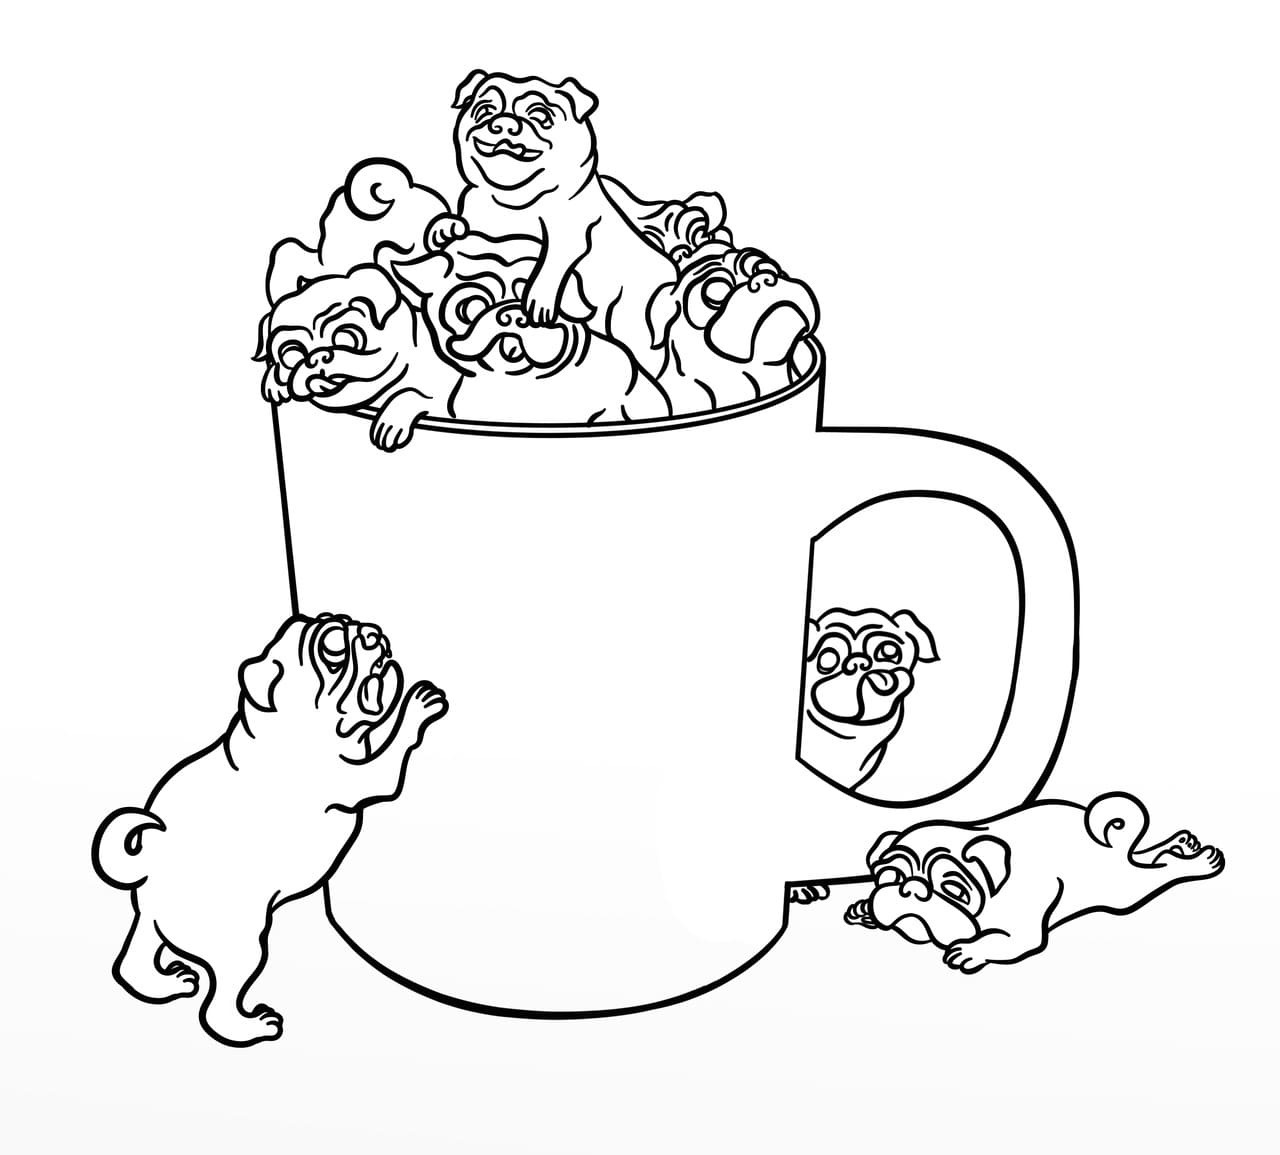 Pug in a Cup Coloring Sheets